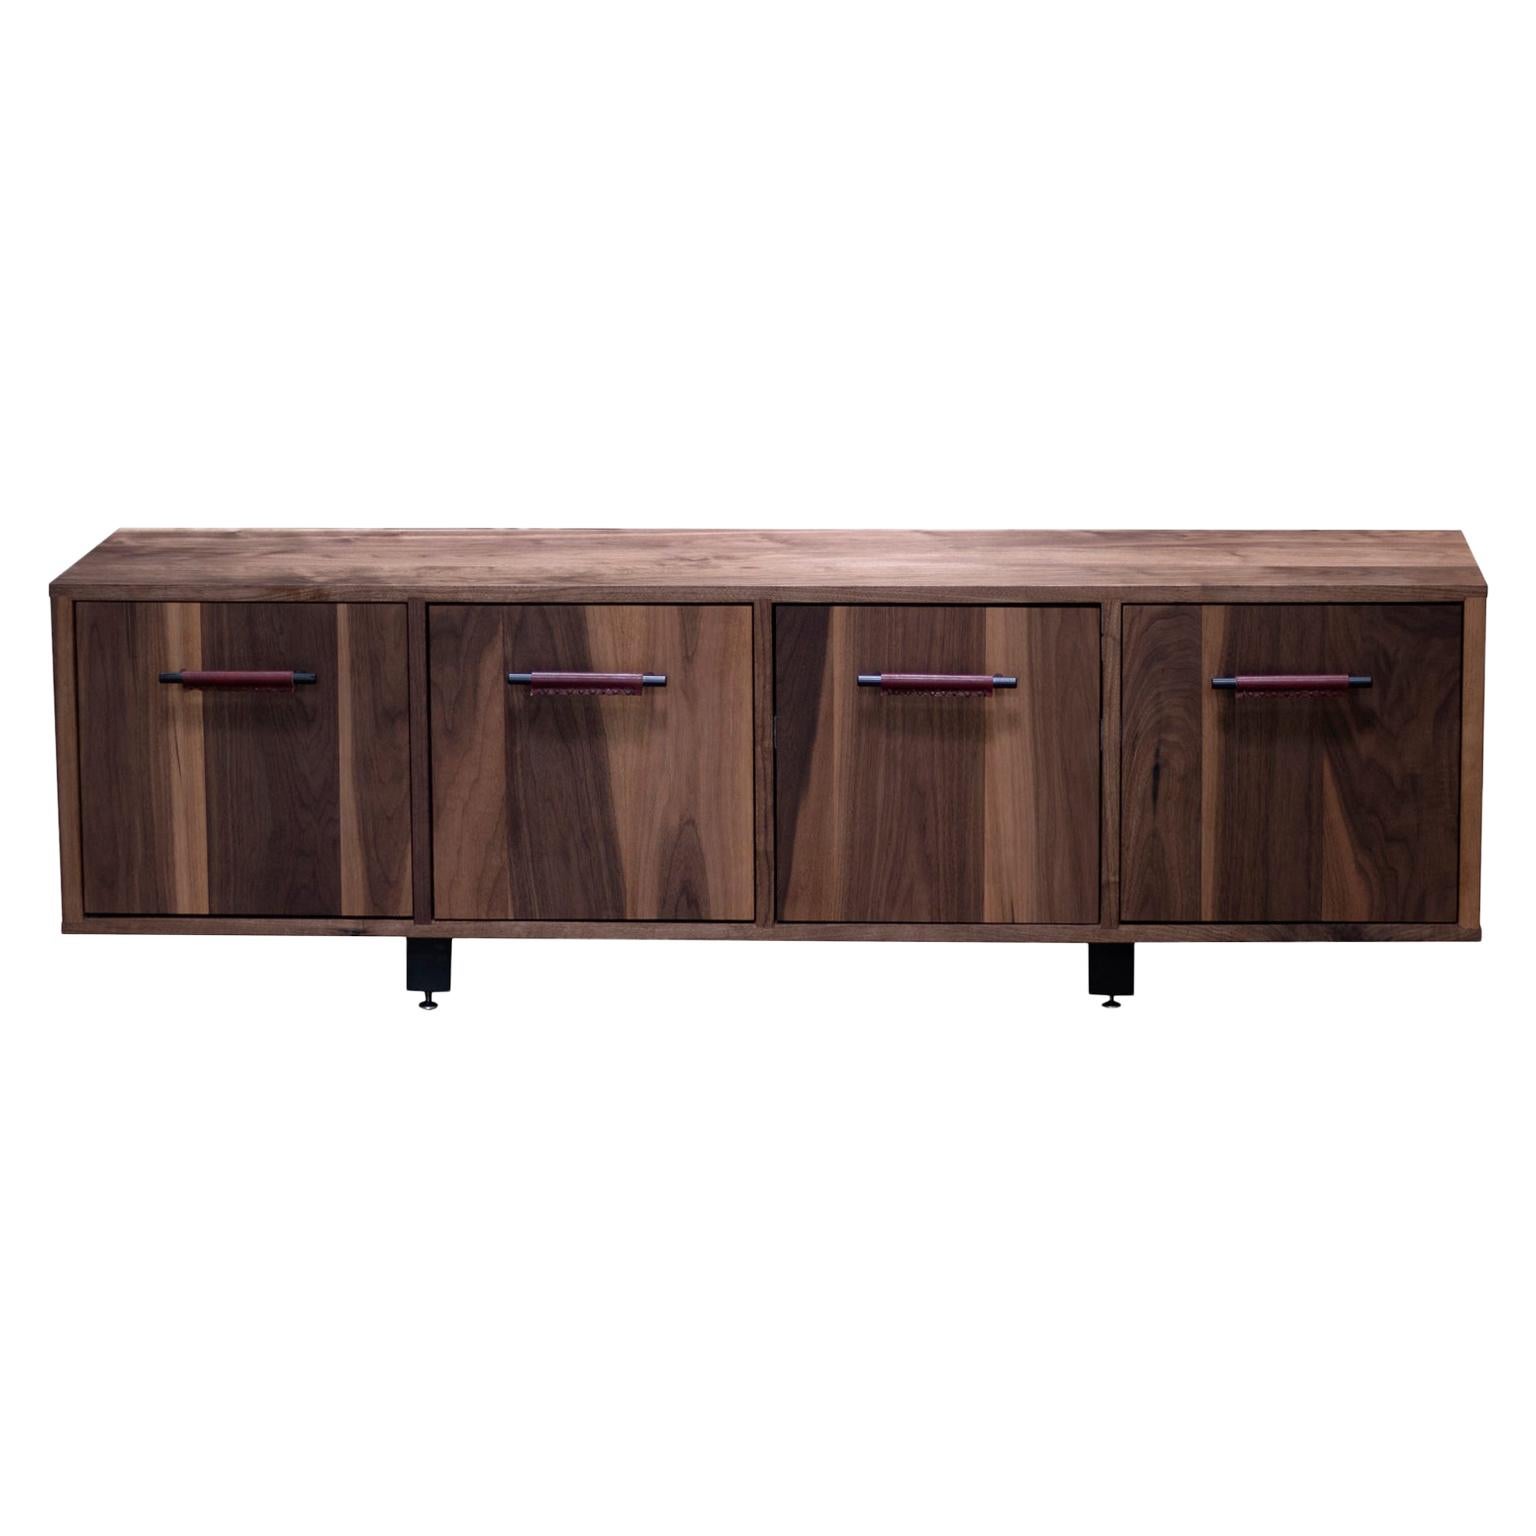 Walnut Belmont Cabinet with Oxblood Leather Pull Handles